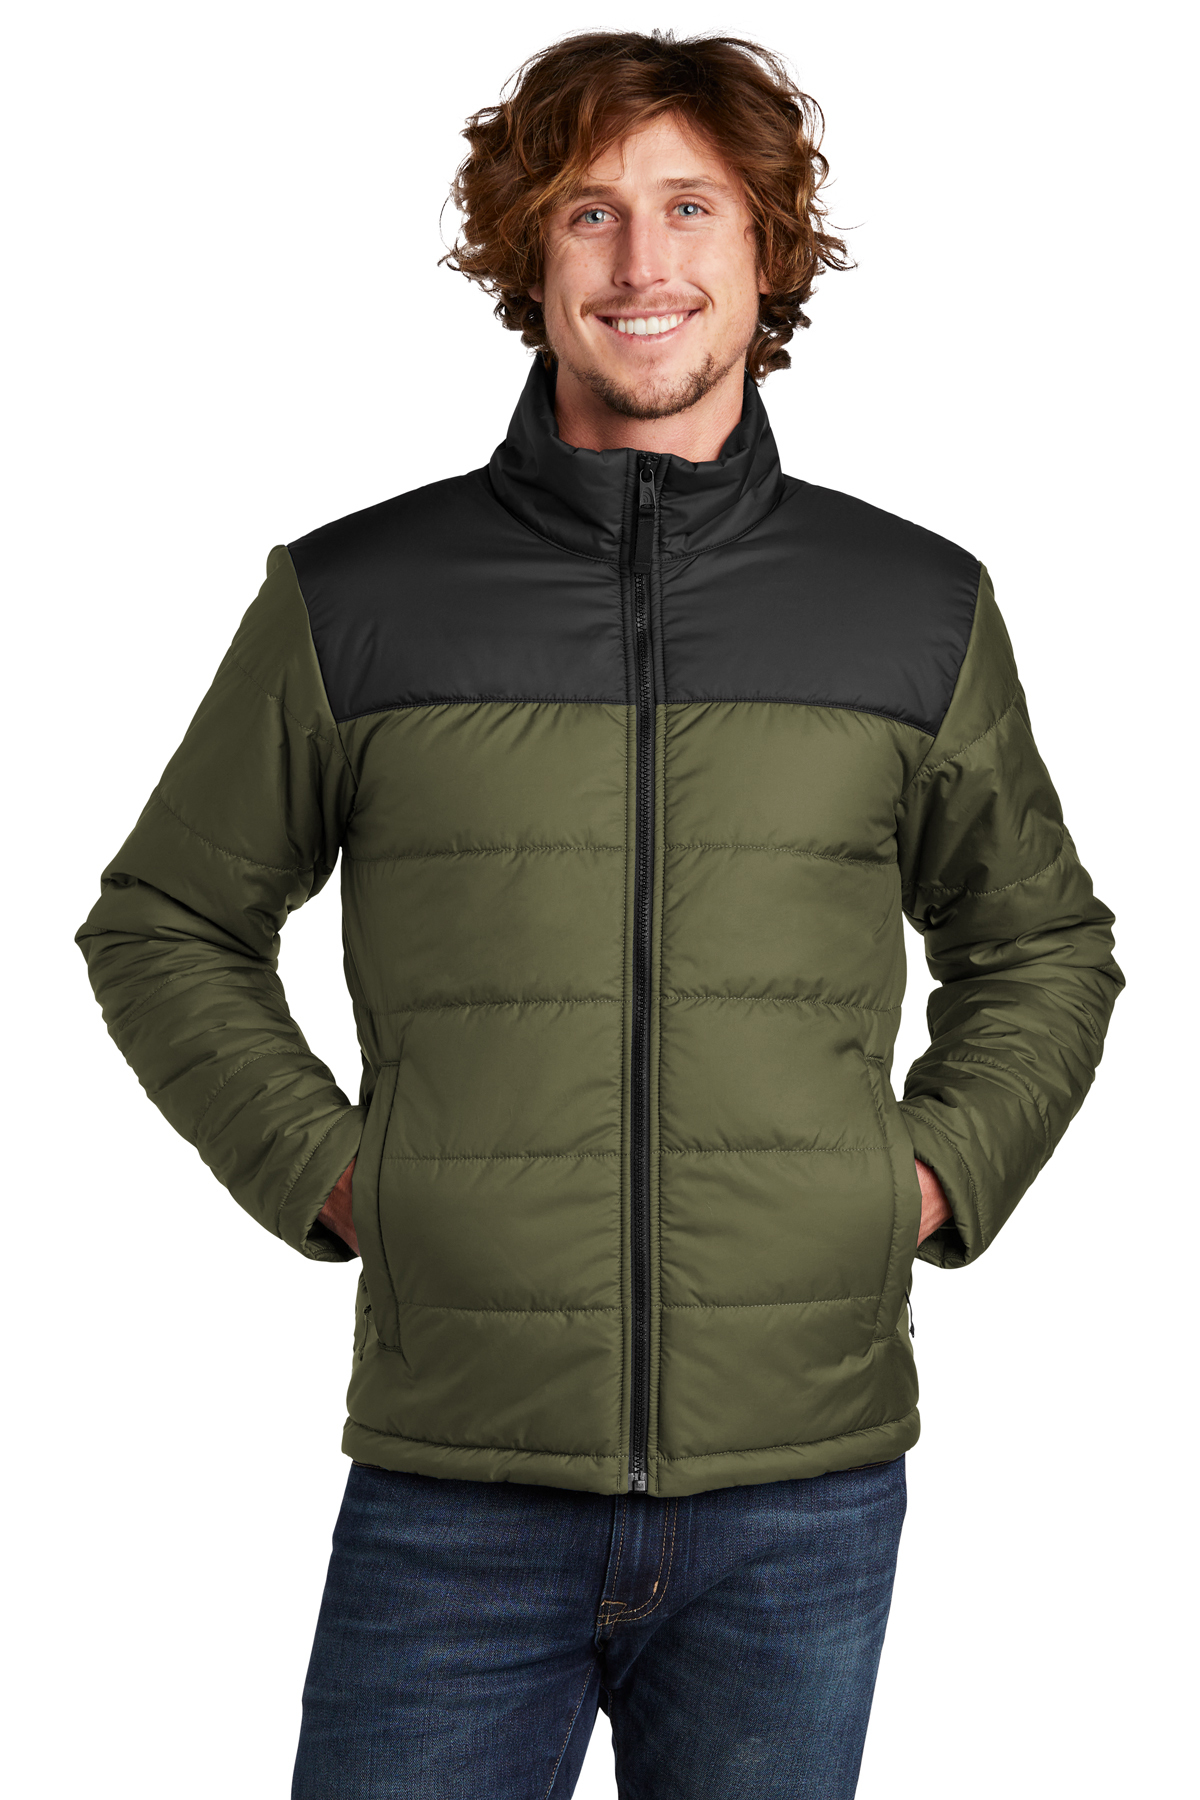 SanMar The Everyday Jacket Face Product | North Insulated |